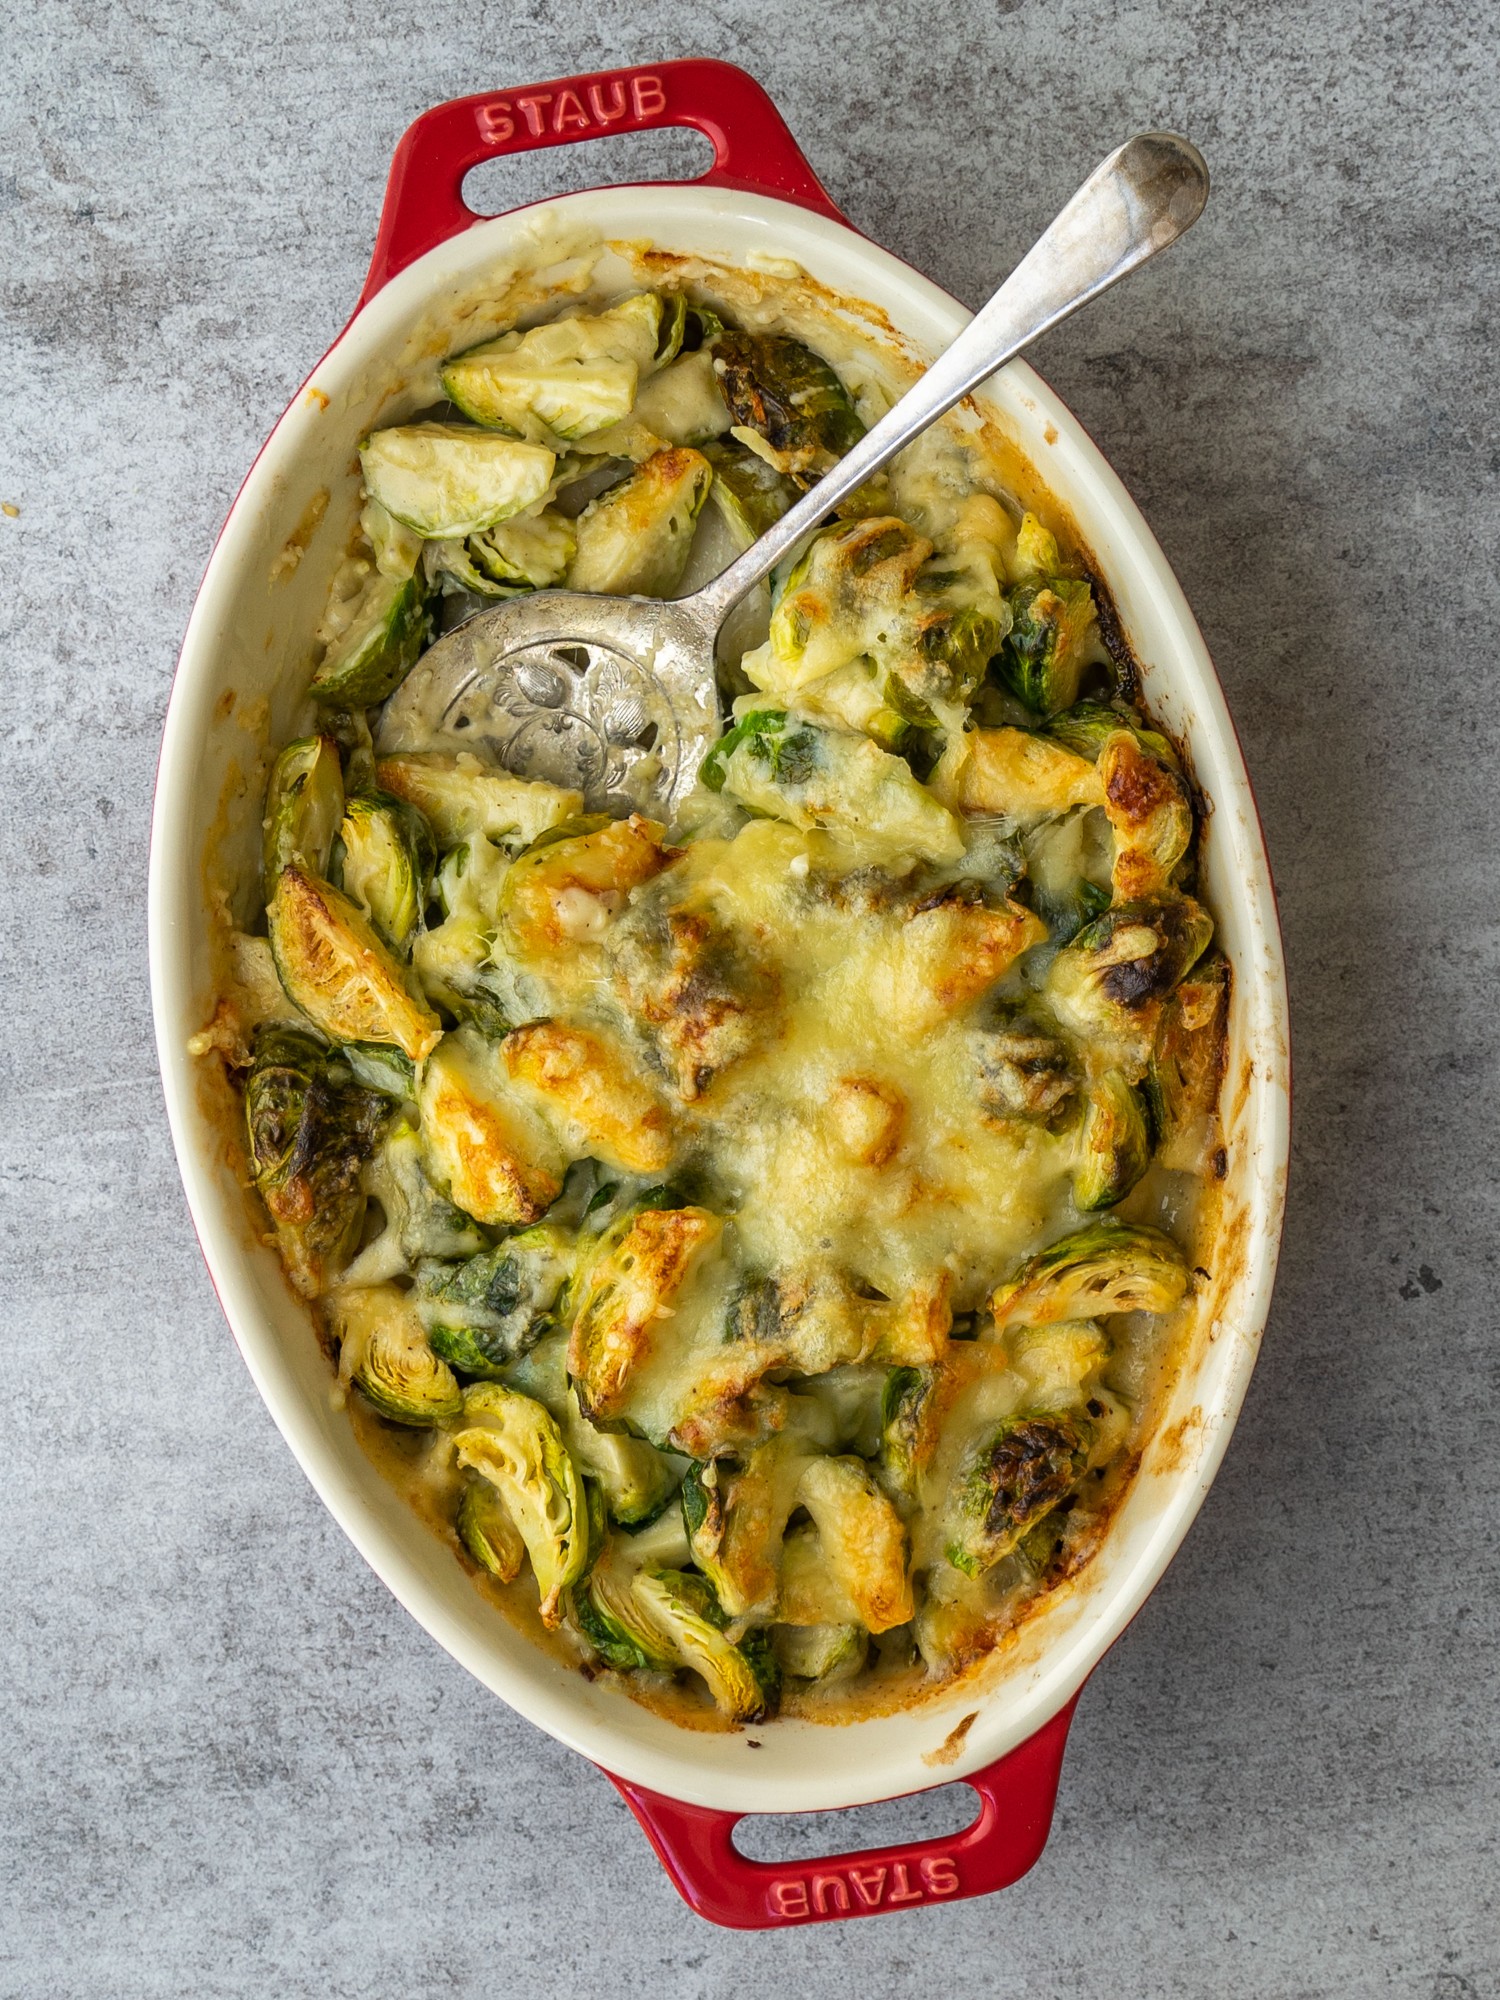 Cheesy Brussels Sprouts